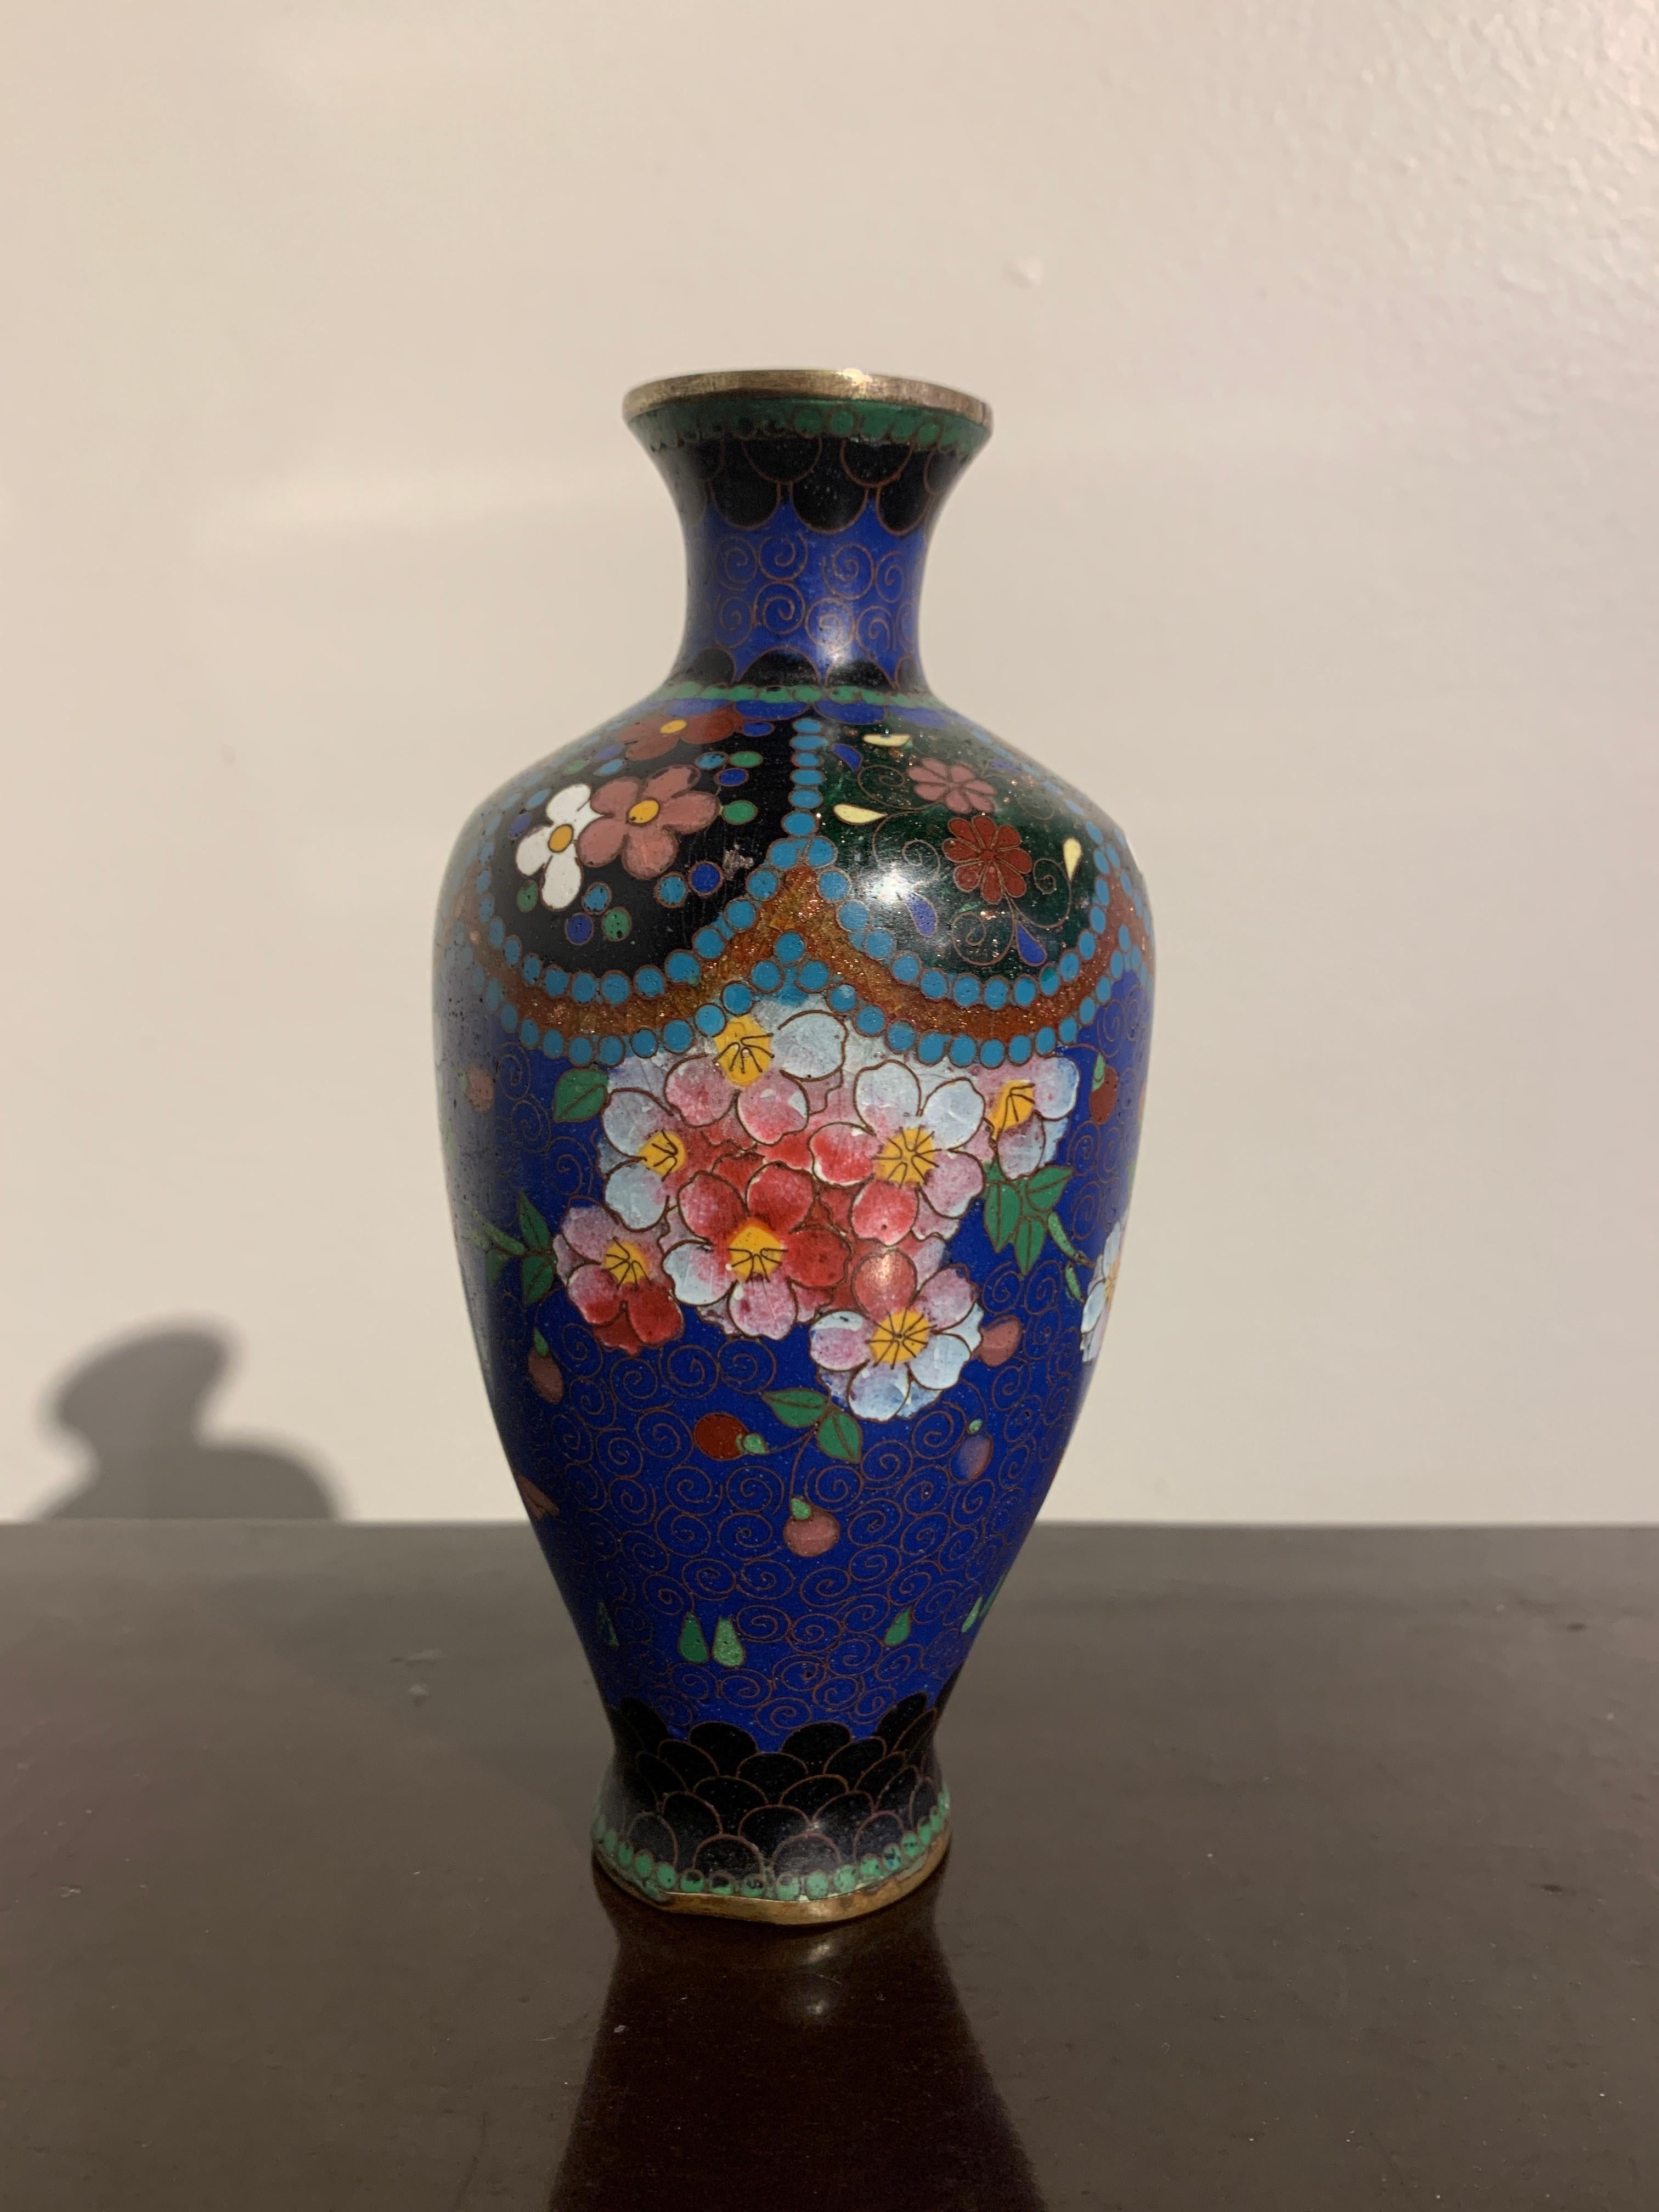 A lovely small Japanese blue ground cloisonné vase, Meiji period, early 20th century.

The vase of typical baluster form, with a blue ground body decorated with sprays of sakura, cherry blossoms. The blush colored blossoms in shades of pinks